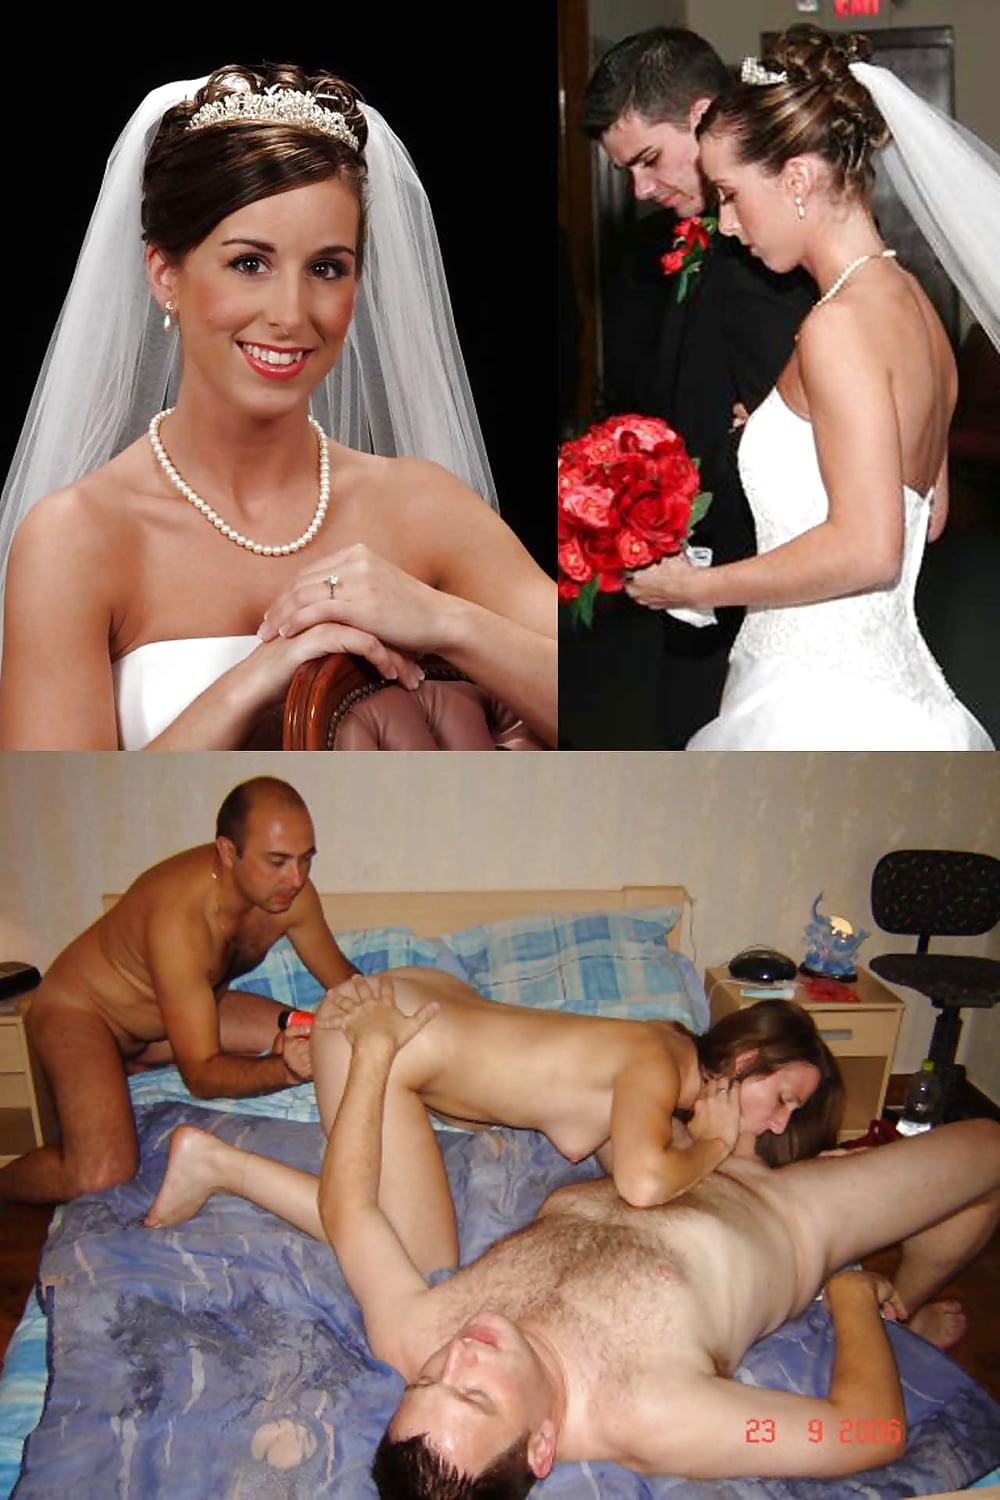 Marriage Porn - Frank Married Couples (59 photos) - motherless porn pics